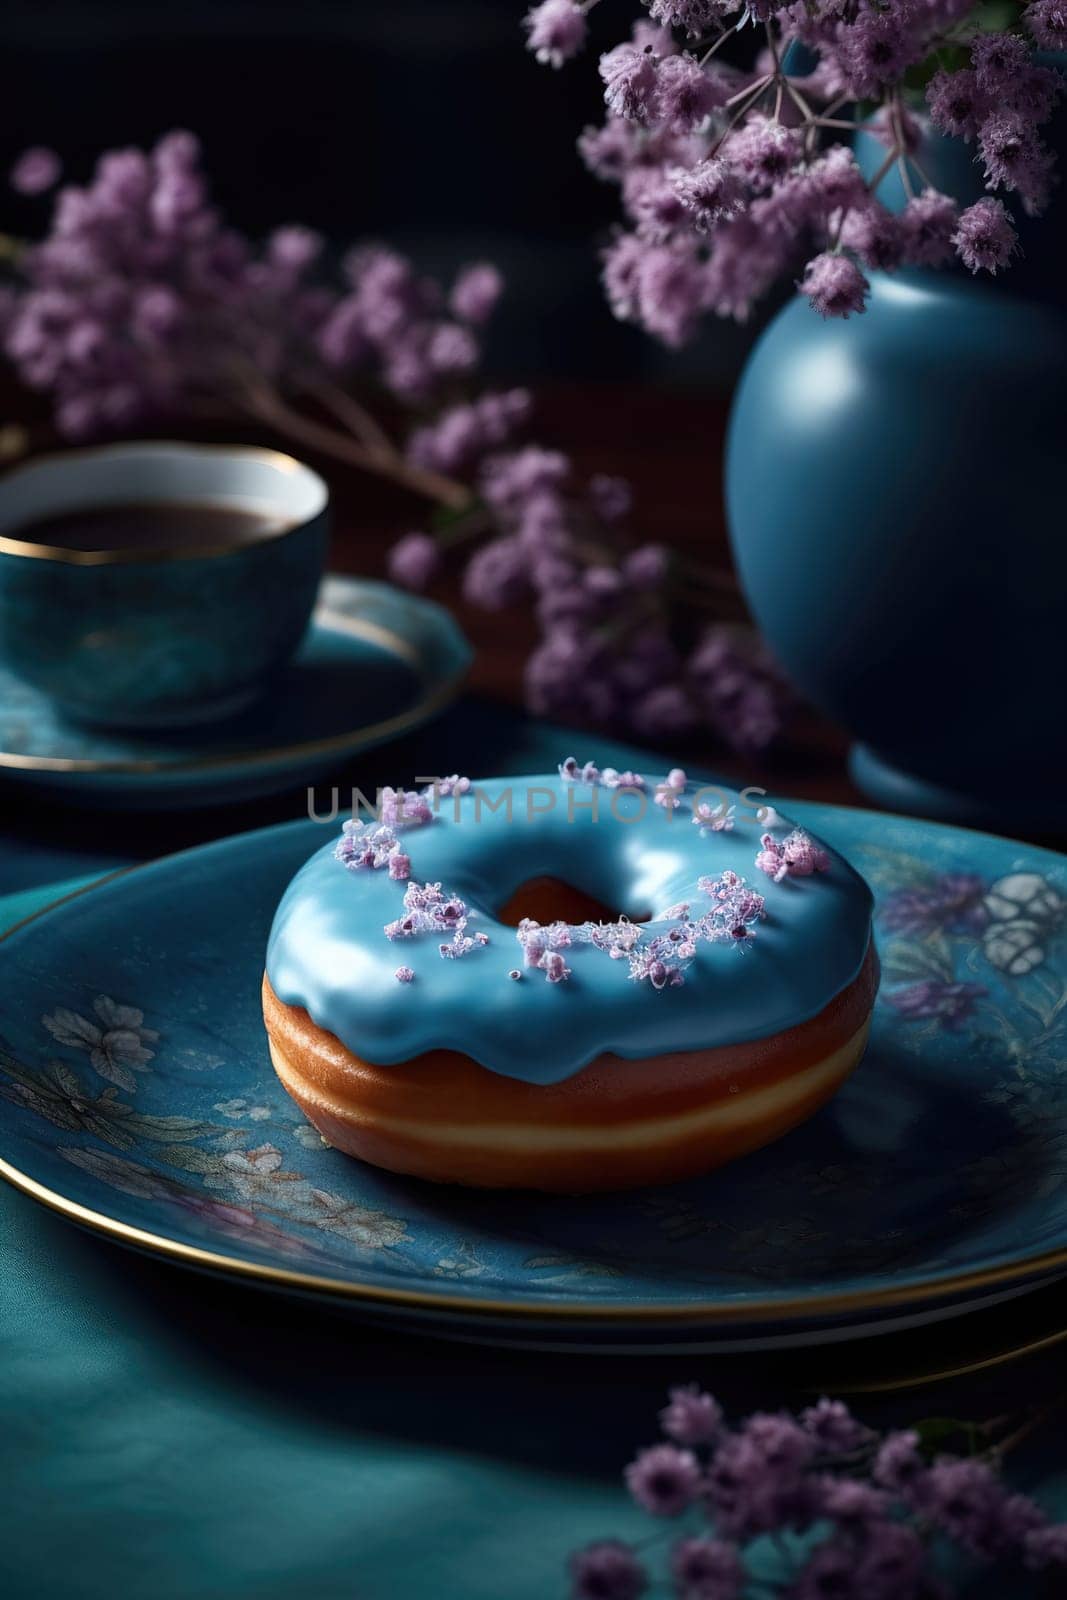 Delicious Sweet Donut With Blue Icing And Topping by tan4ikk1